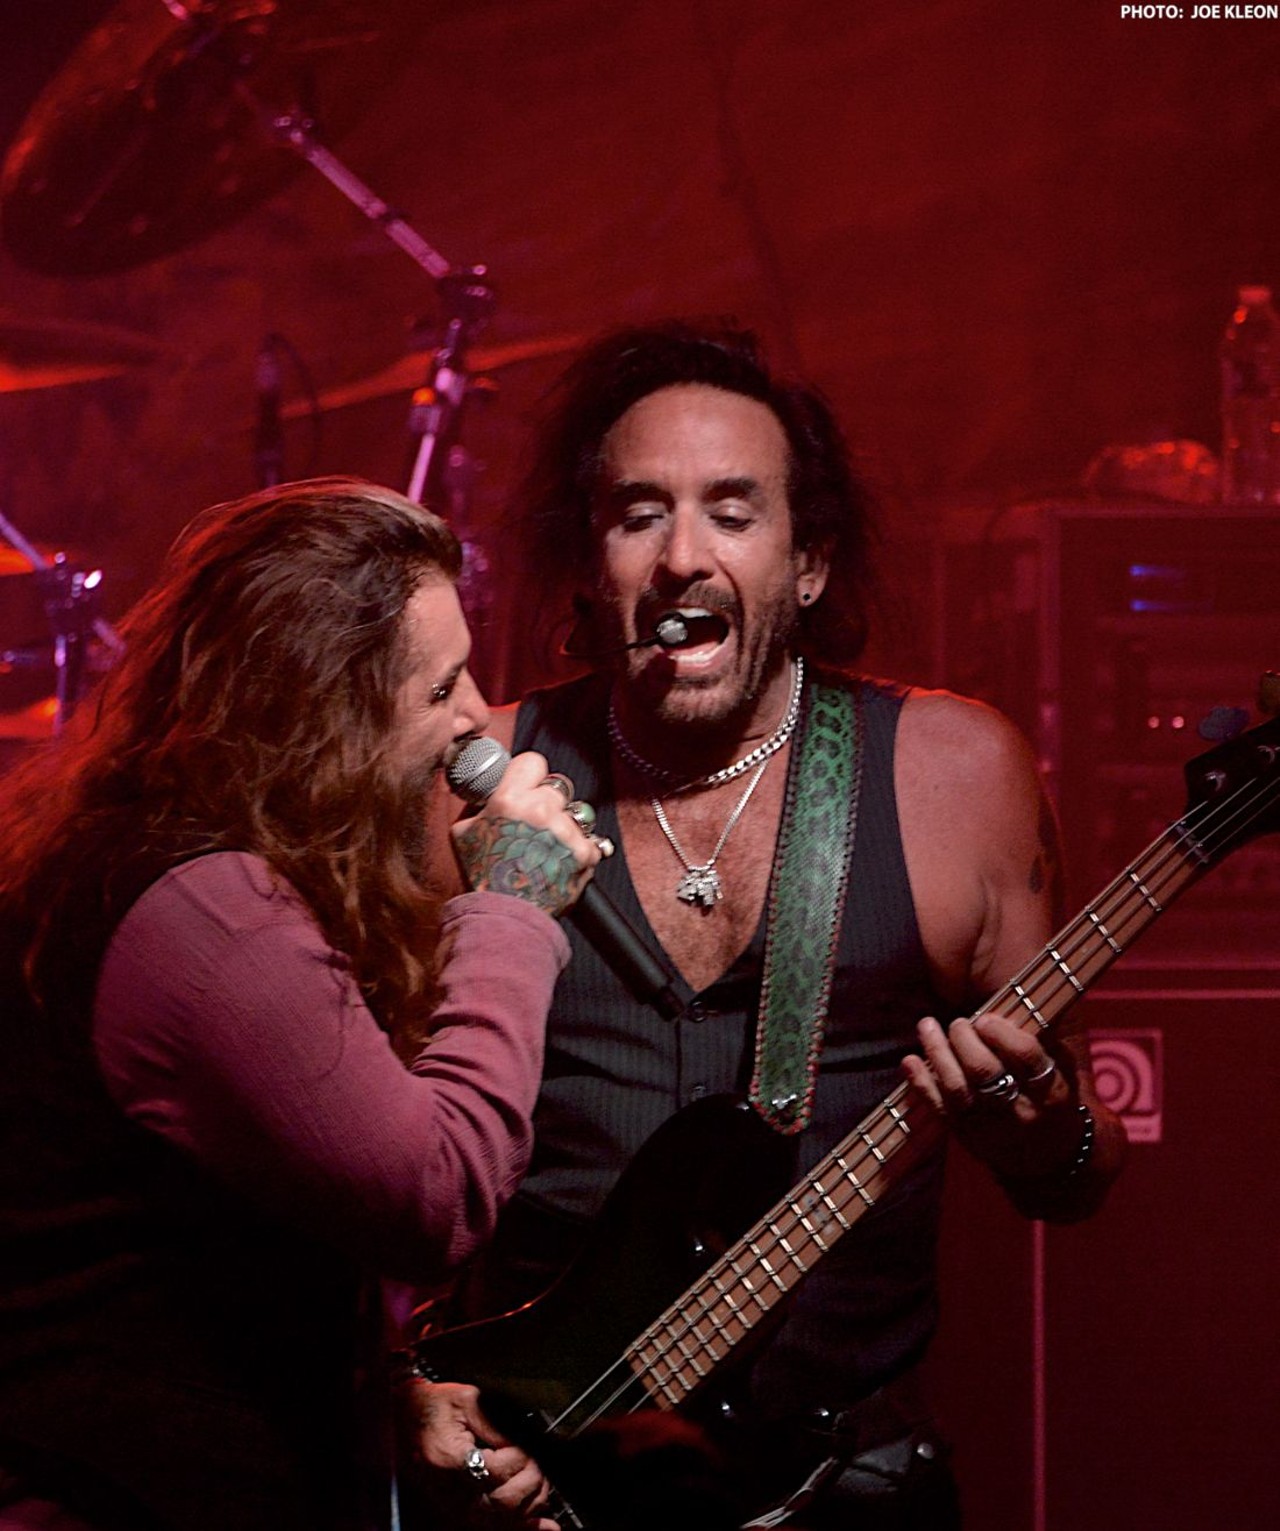 Dead Daisies, Hookers & Blow and the Velvematics Performing at the Agora